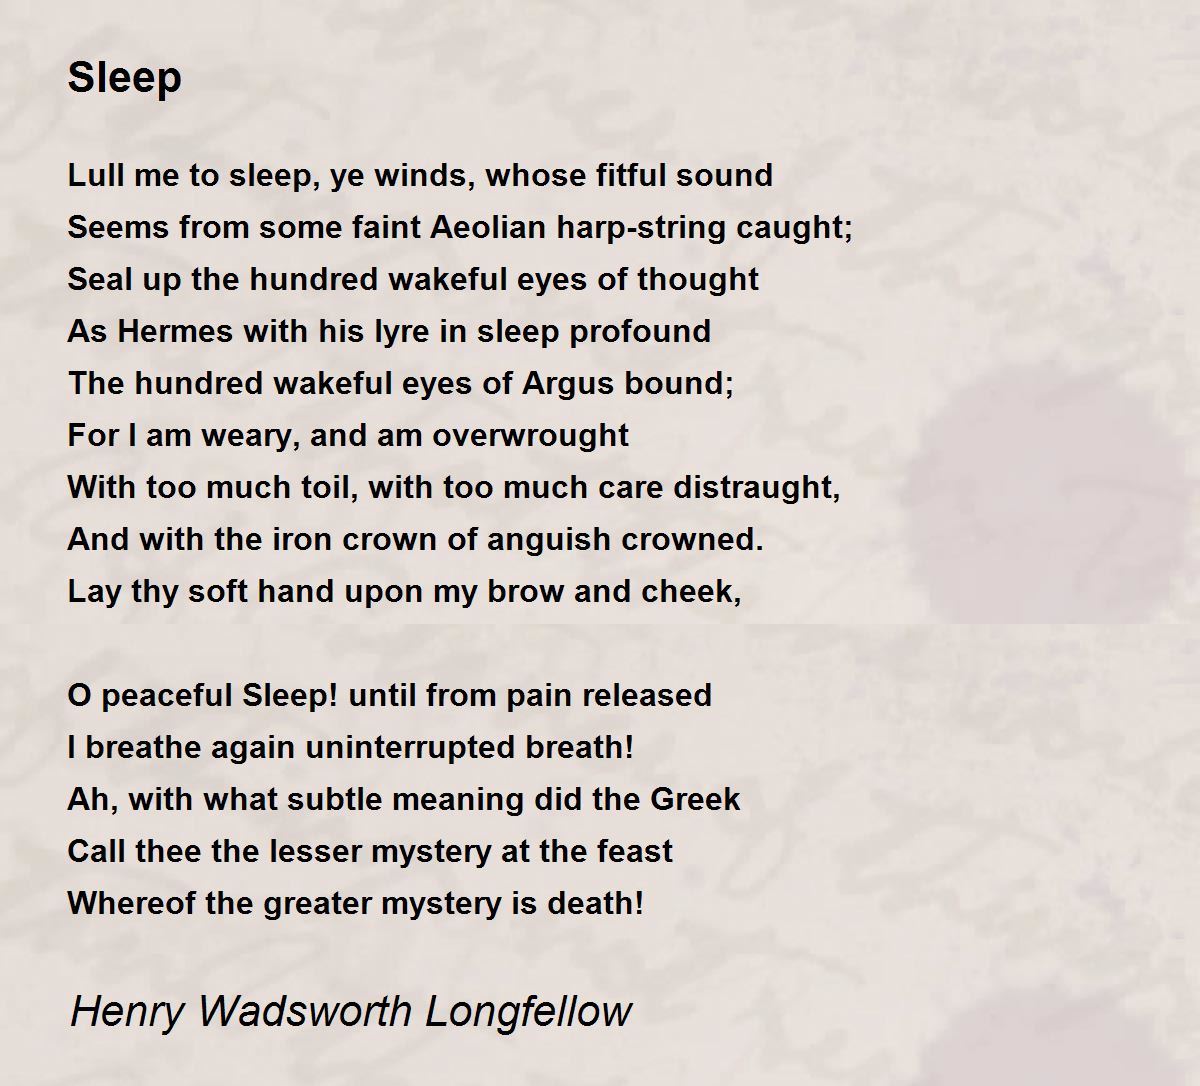 What is the mood in Henry Wadsworth Longfellow's poem 